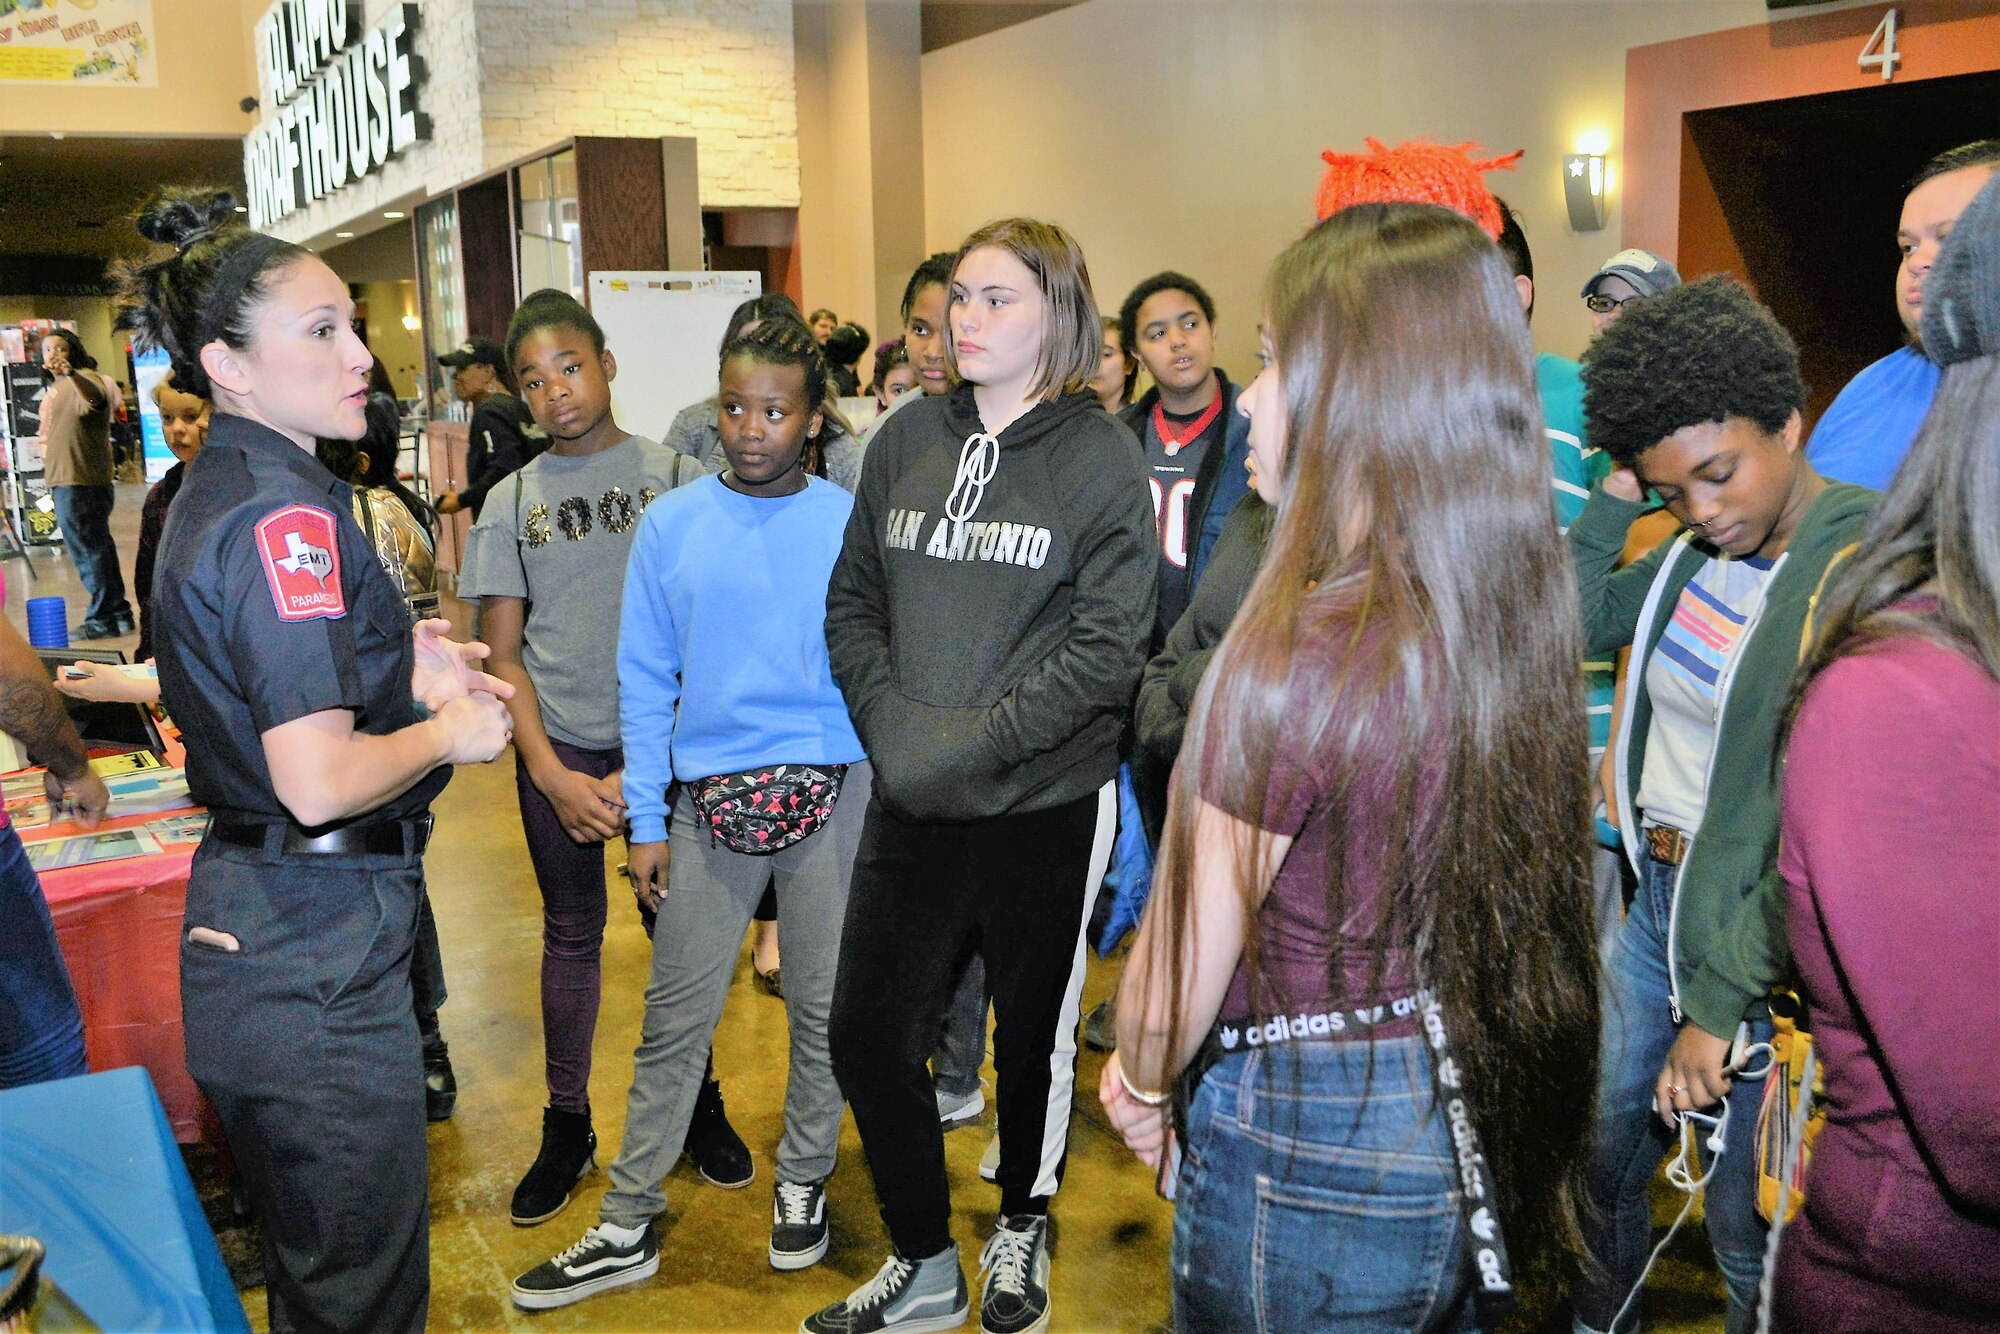 Dana Zamarripa, a firefighter/paramedic with the city of San Antonio, talks with a group of girls during the “Marvelous Women Don’t Need Capes,” event in the lobby of the Alamo Drafthouse movie cinema March 23, 2019.